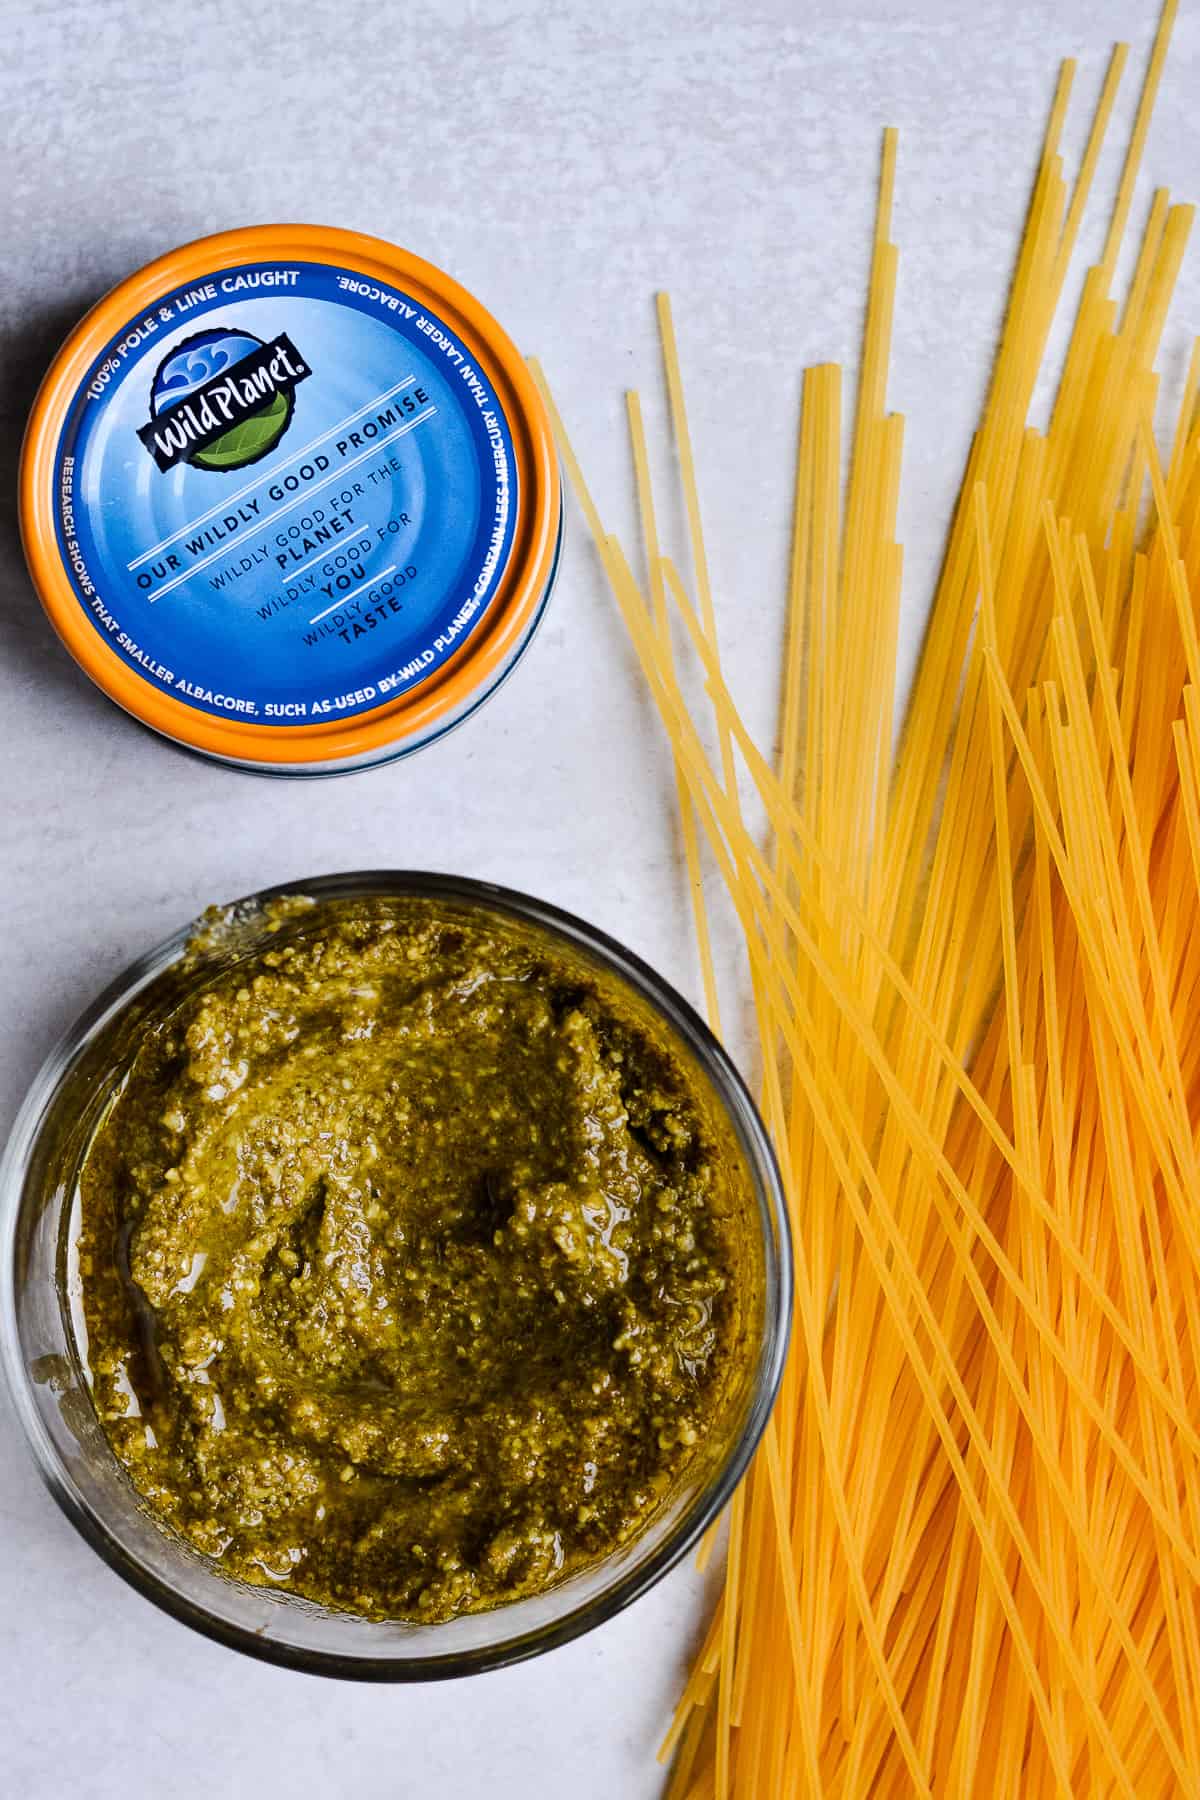 Spaghetti noodles, pesto in a bowl and can of Wild Planet tuna laying on a countertop.